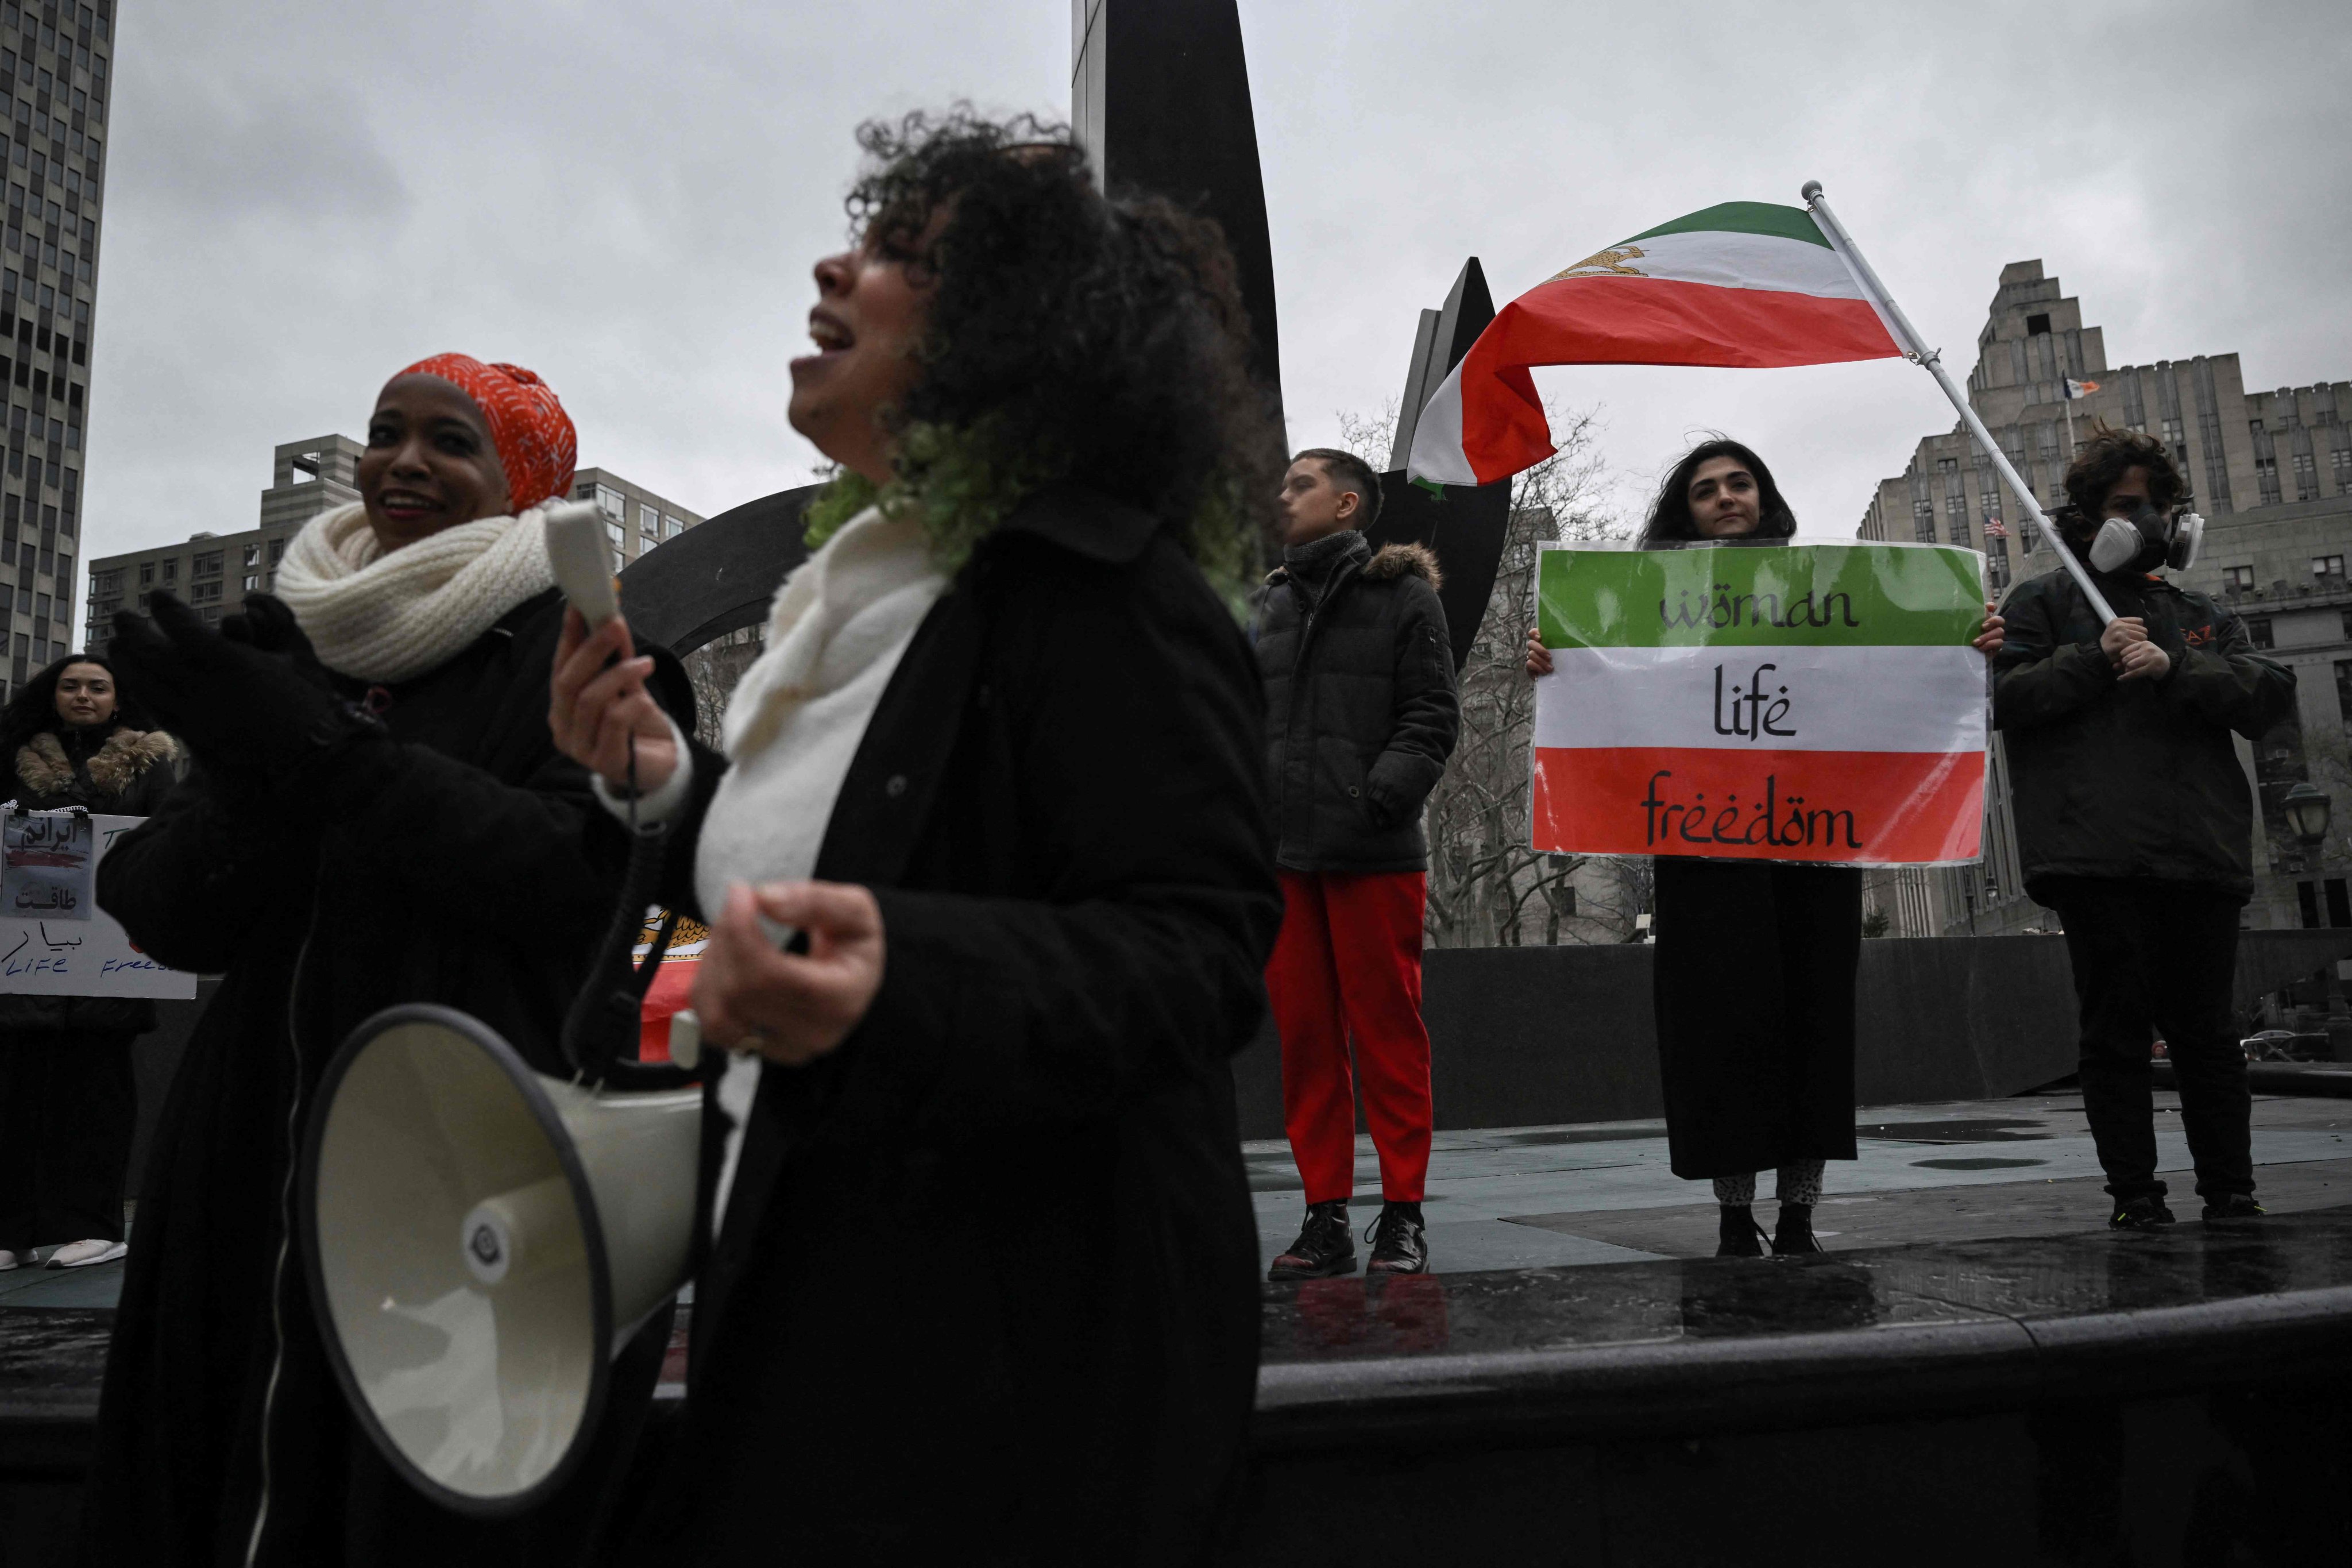 Activists from New York-based Iranian women’s rights group Woman Life Freedom attend a rally condemning the mass poisoning of Iranian female students, in New York, US on March 11. Photo: AFP